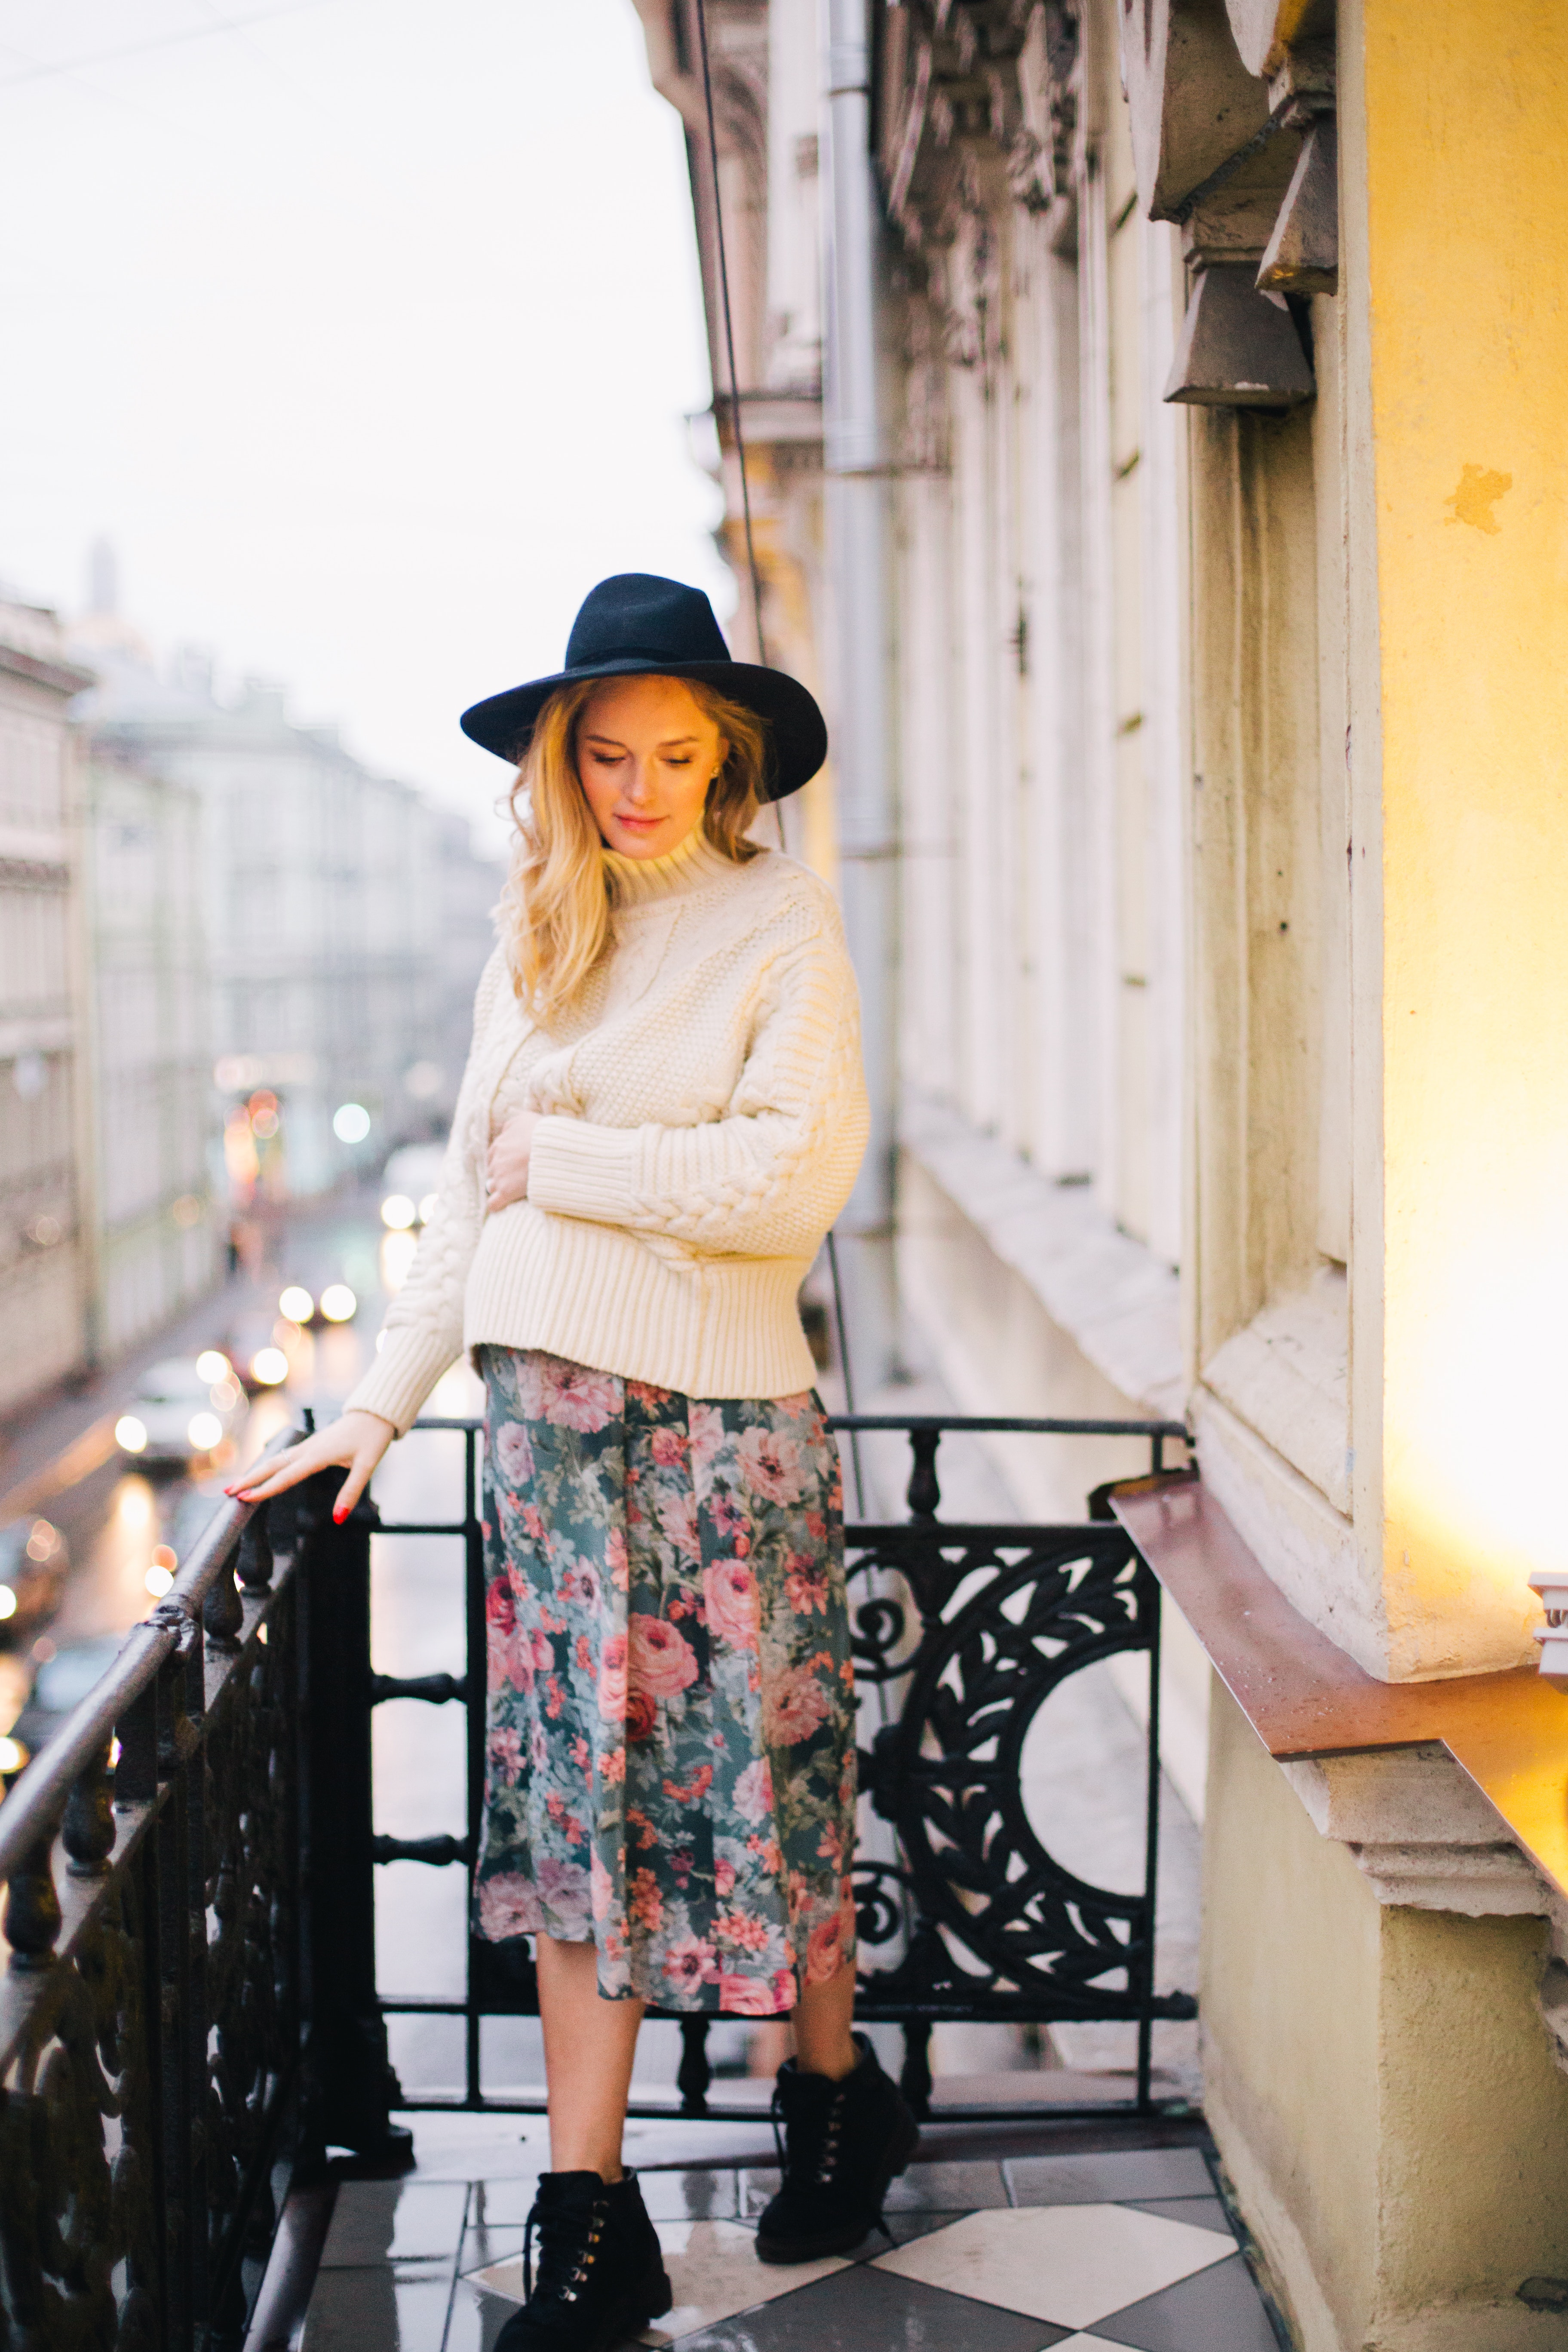 Pregnant woman wearing white sweater and multicolored floral skirt standing on balcony photo